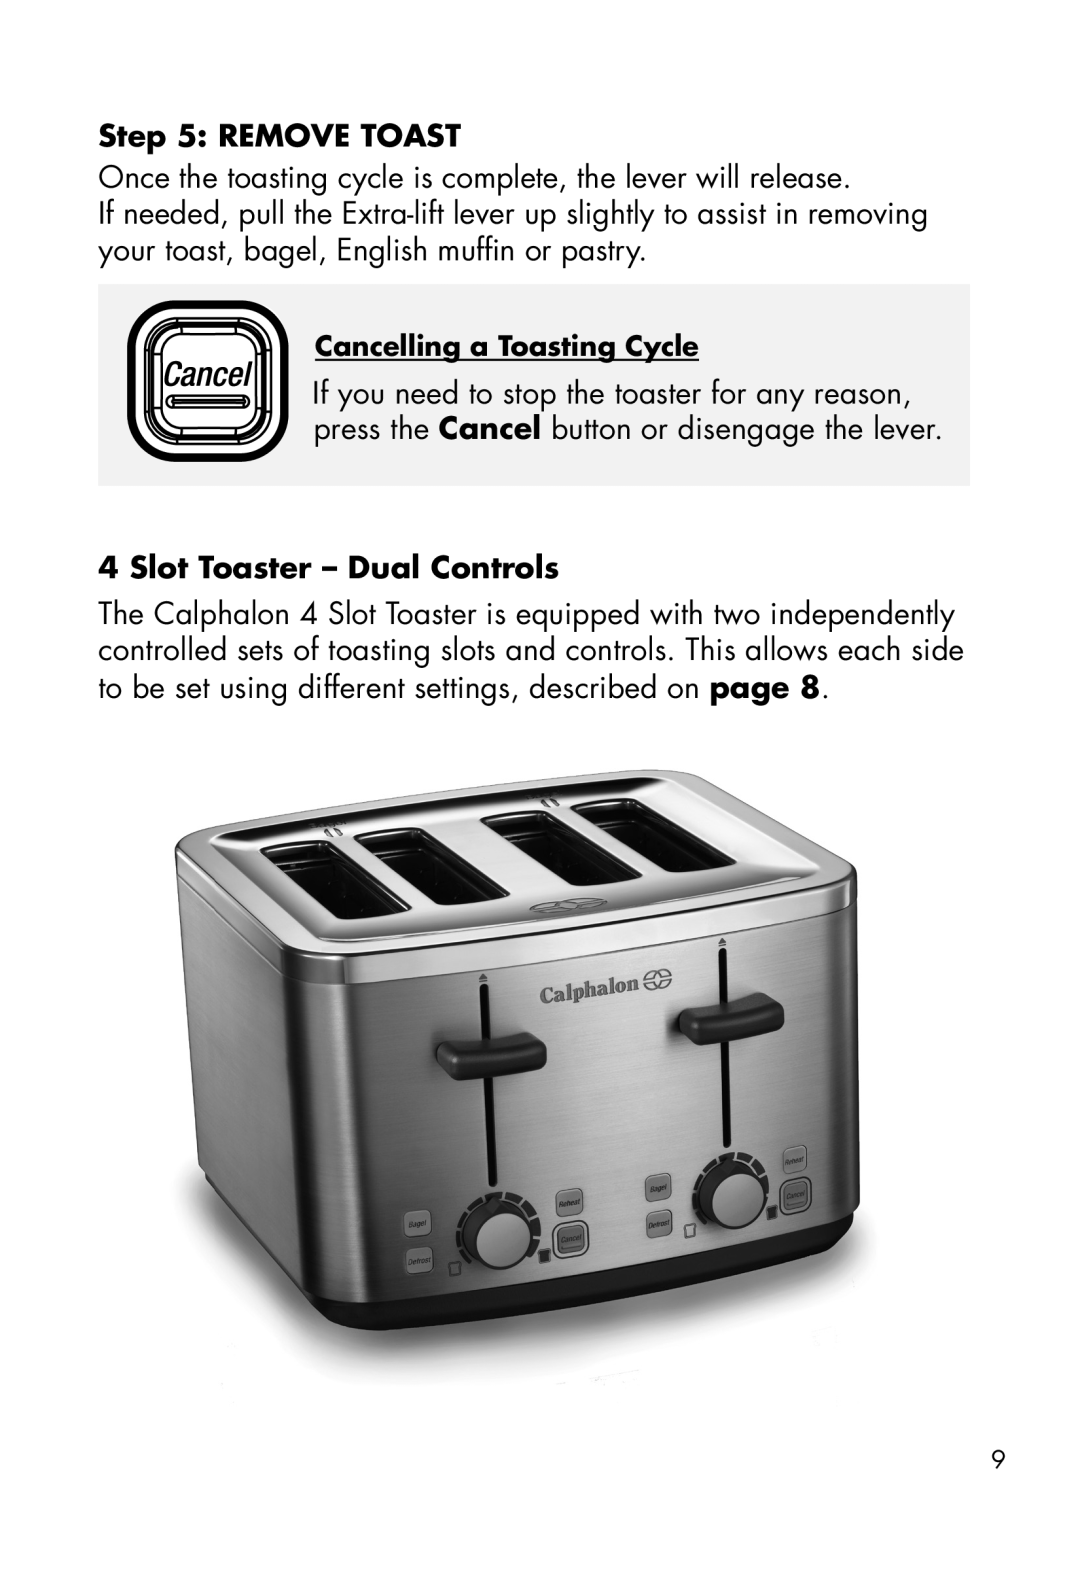 Calphalon 1779206, 1779207 manual Remove Toast, Slot Toaster - Dual Controls, Cancelling a Toasting Cycle 